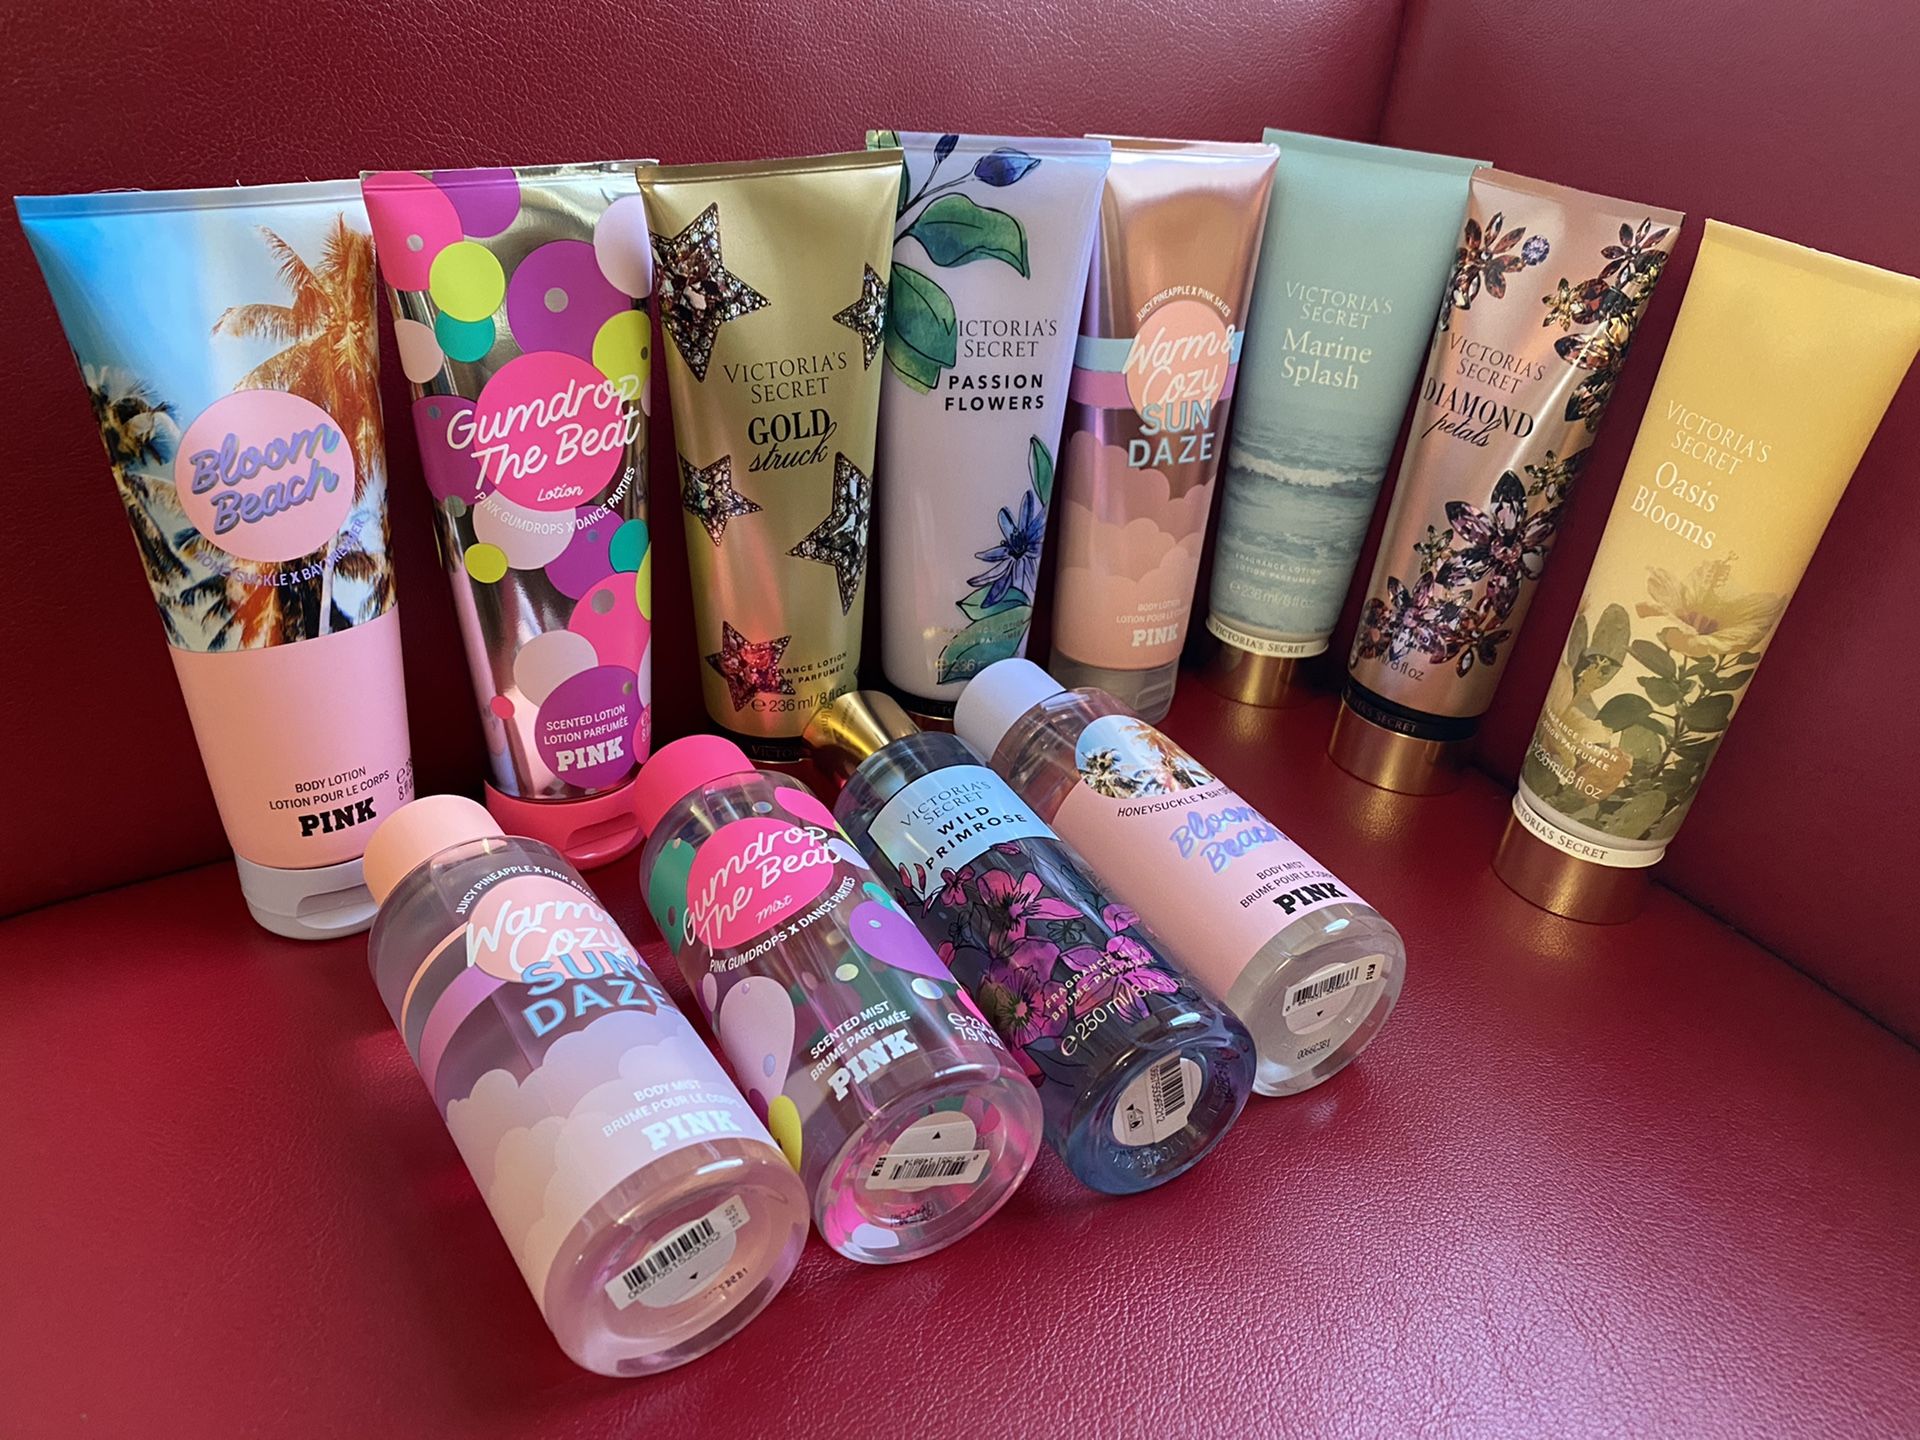 Victoria’s Secret lotions and body mists